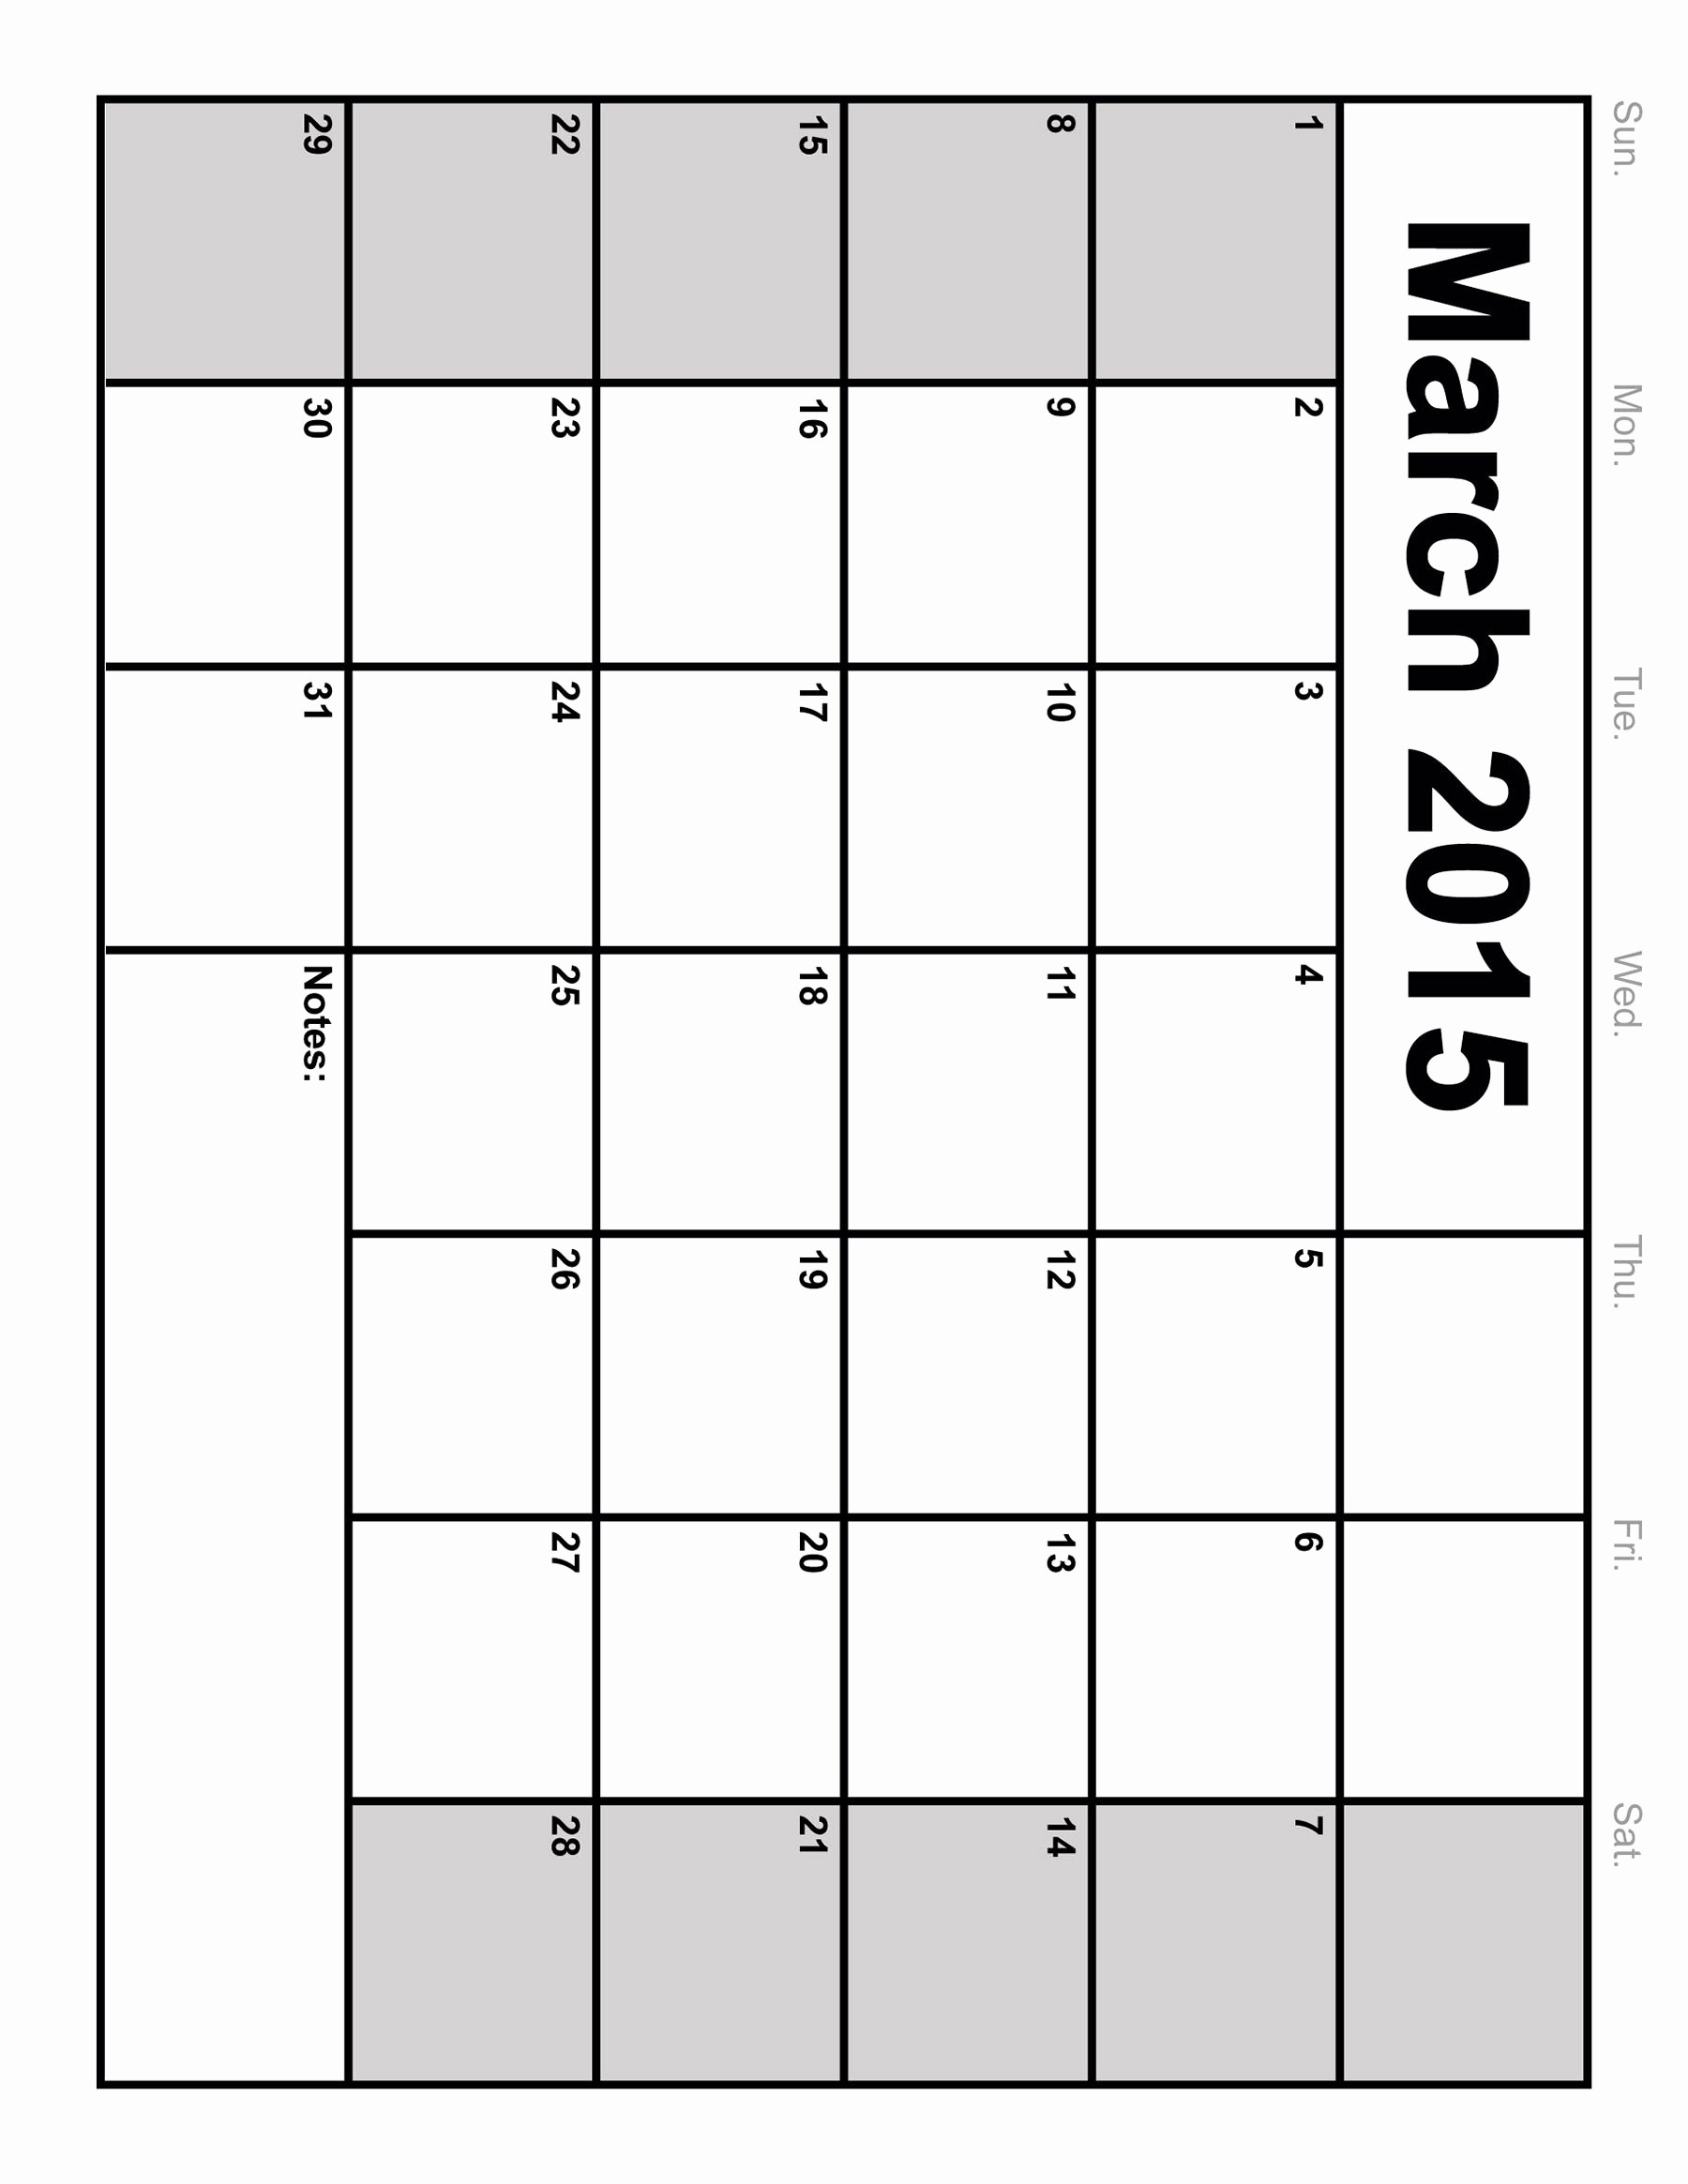 Free Monthly Calendar Templates 2015 Lovely March 2015 Calendar Printable Monthly Blank Calendar 2015